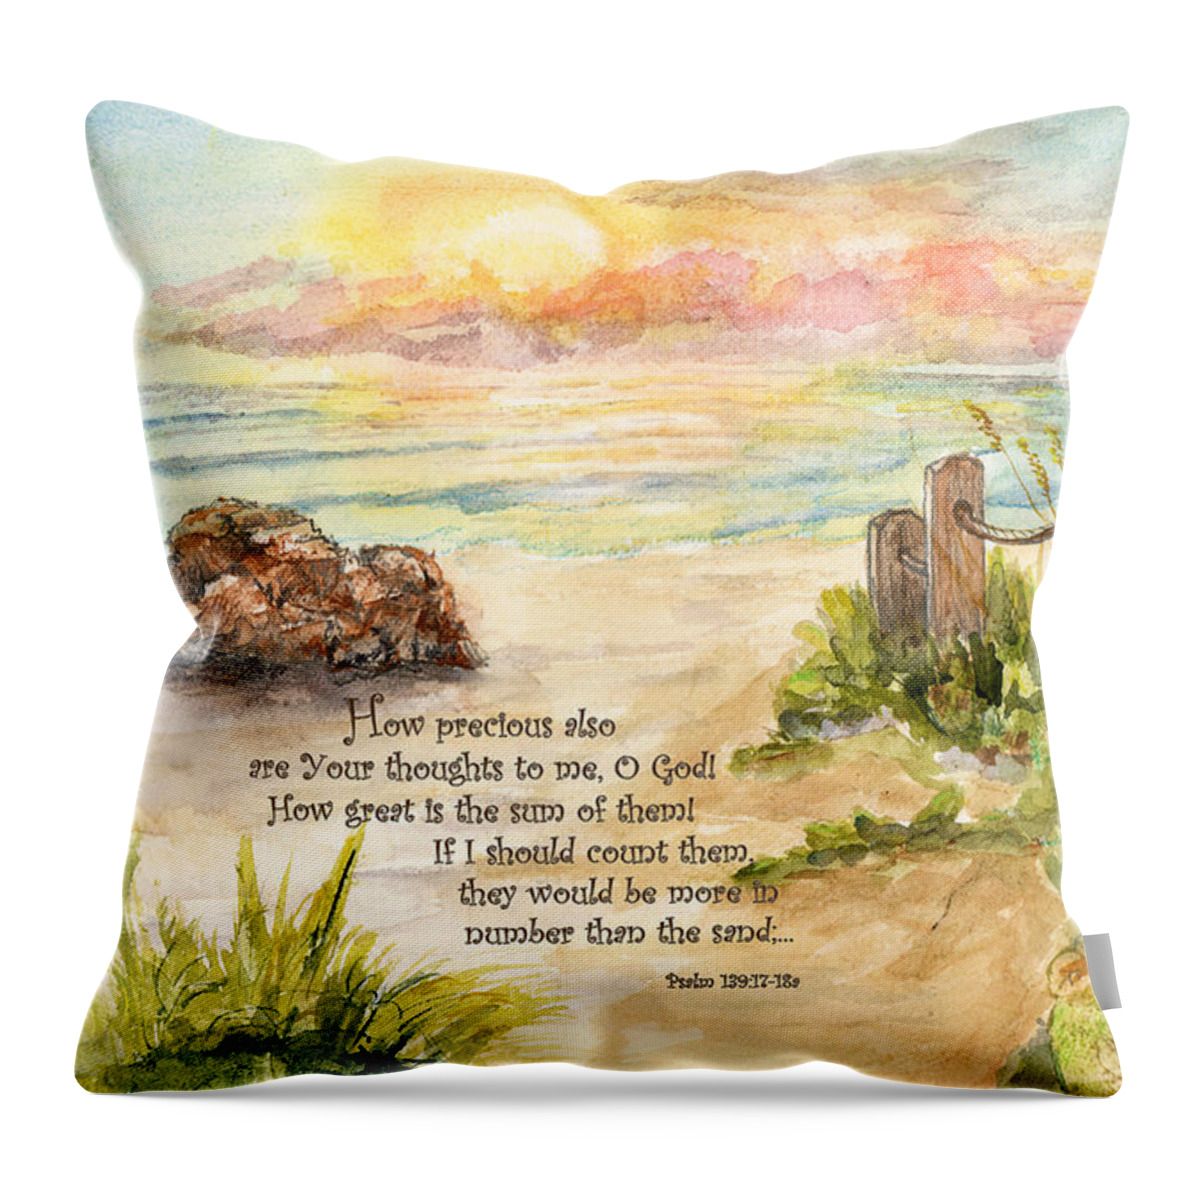 Ocean Throw Pillow featuring the painting Beach Post Sunrise Psalm 139 by Janis Lee Colon